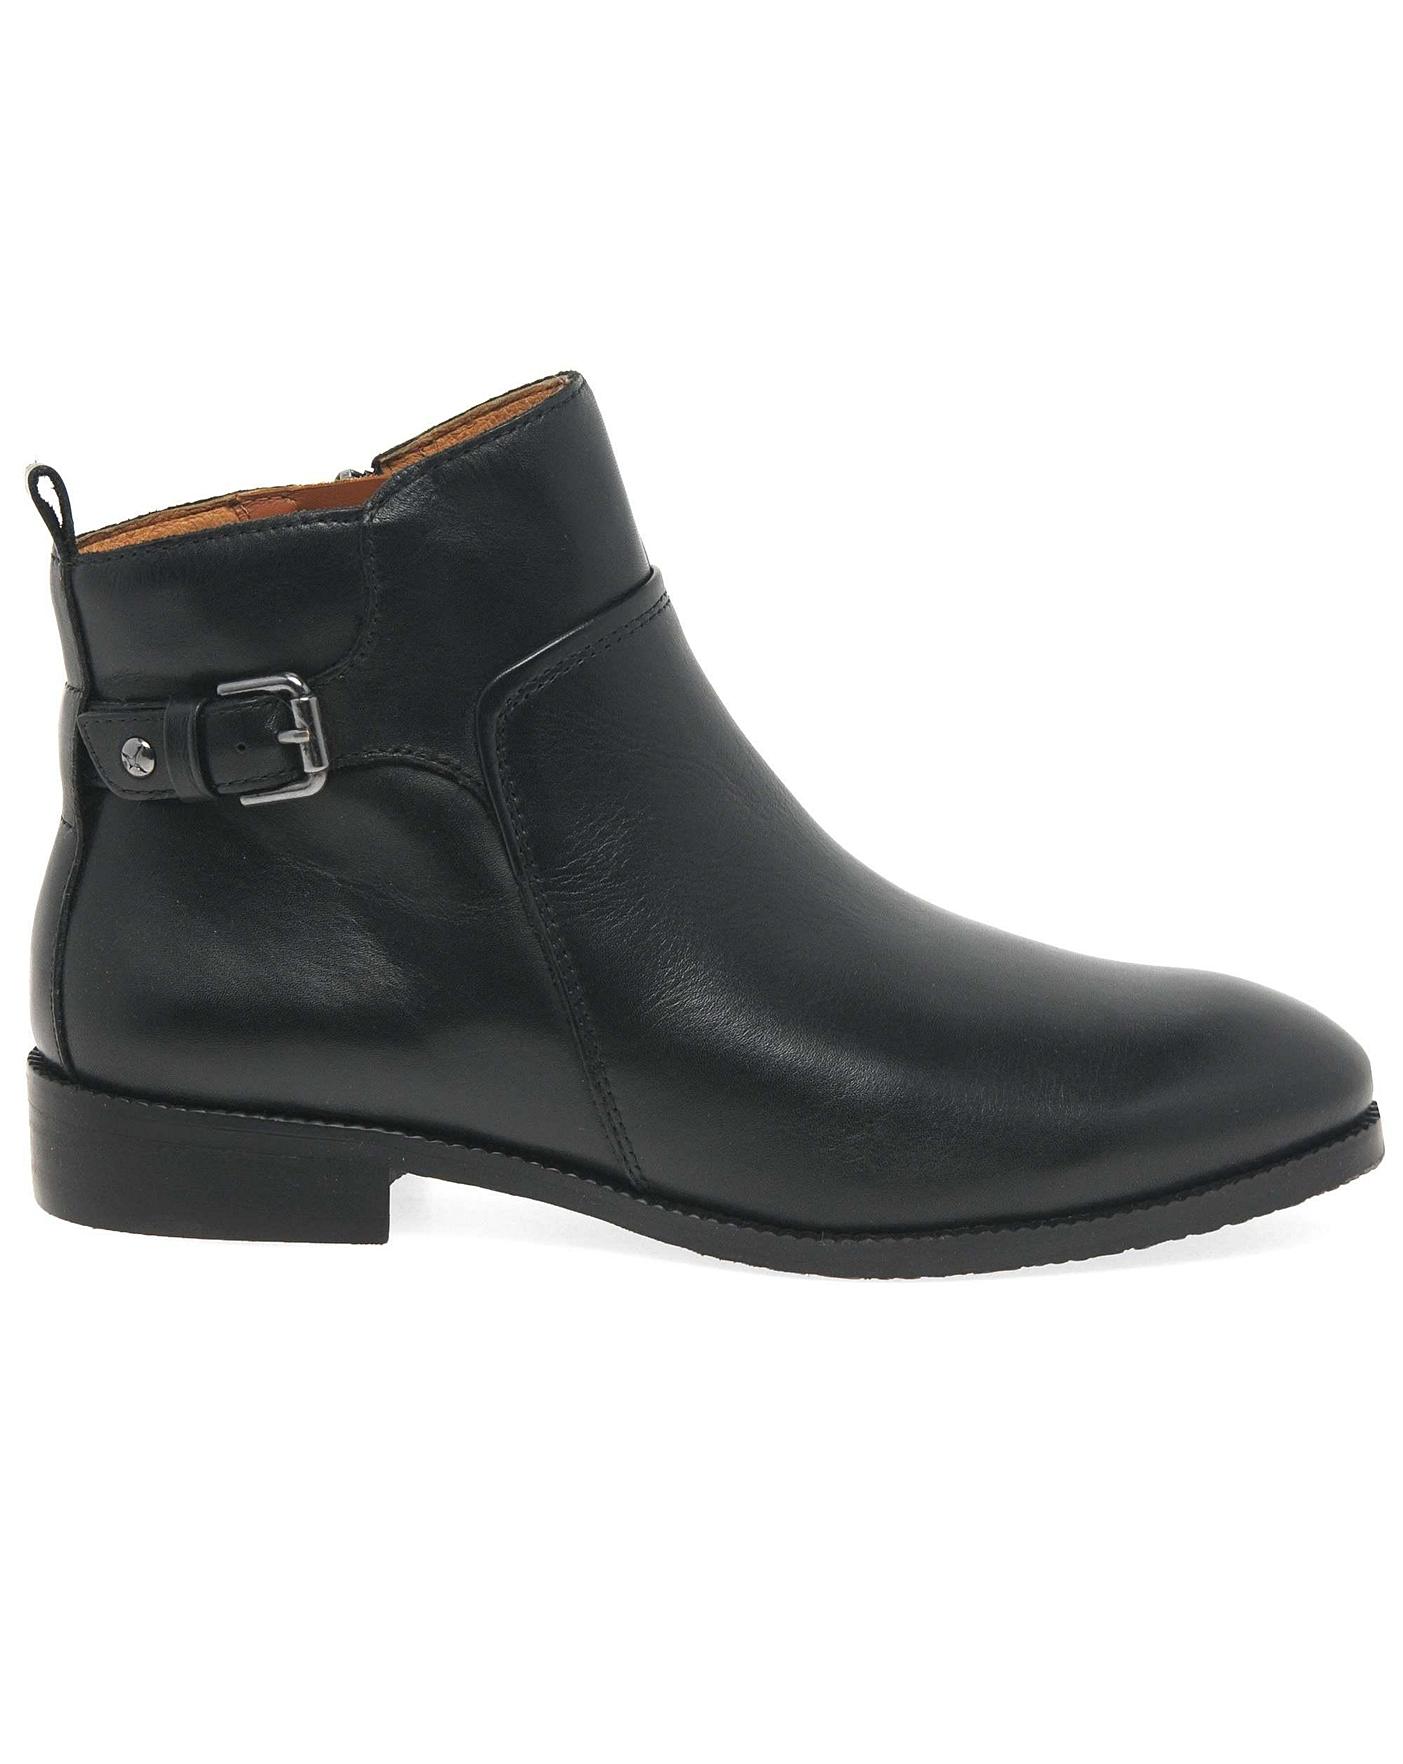 marisota ankle boots